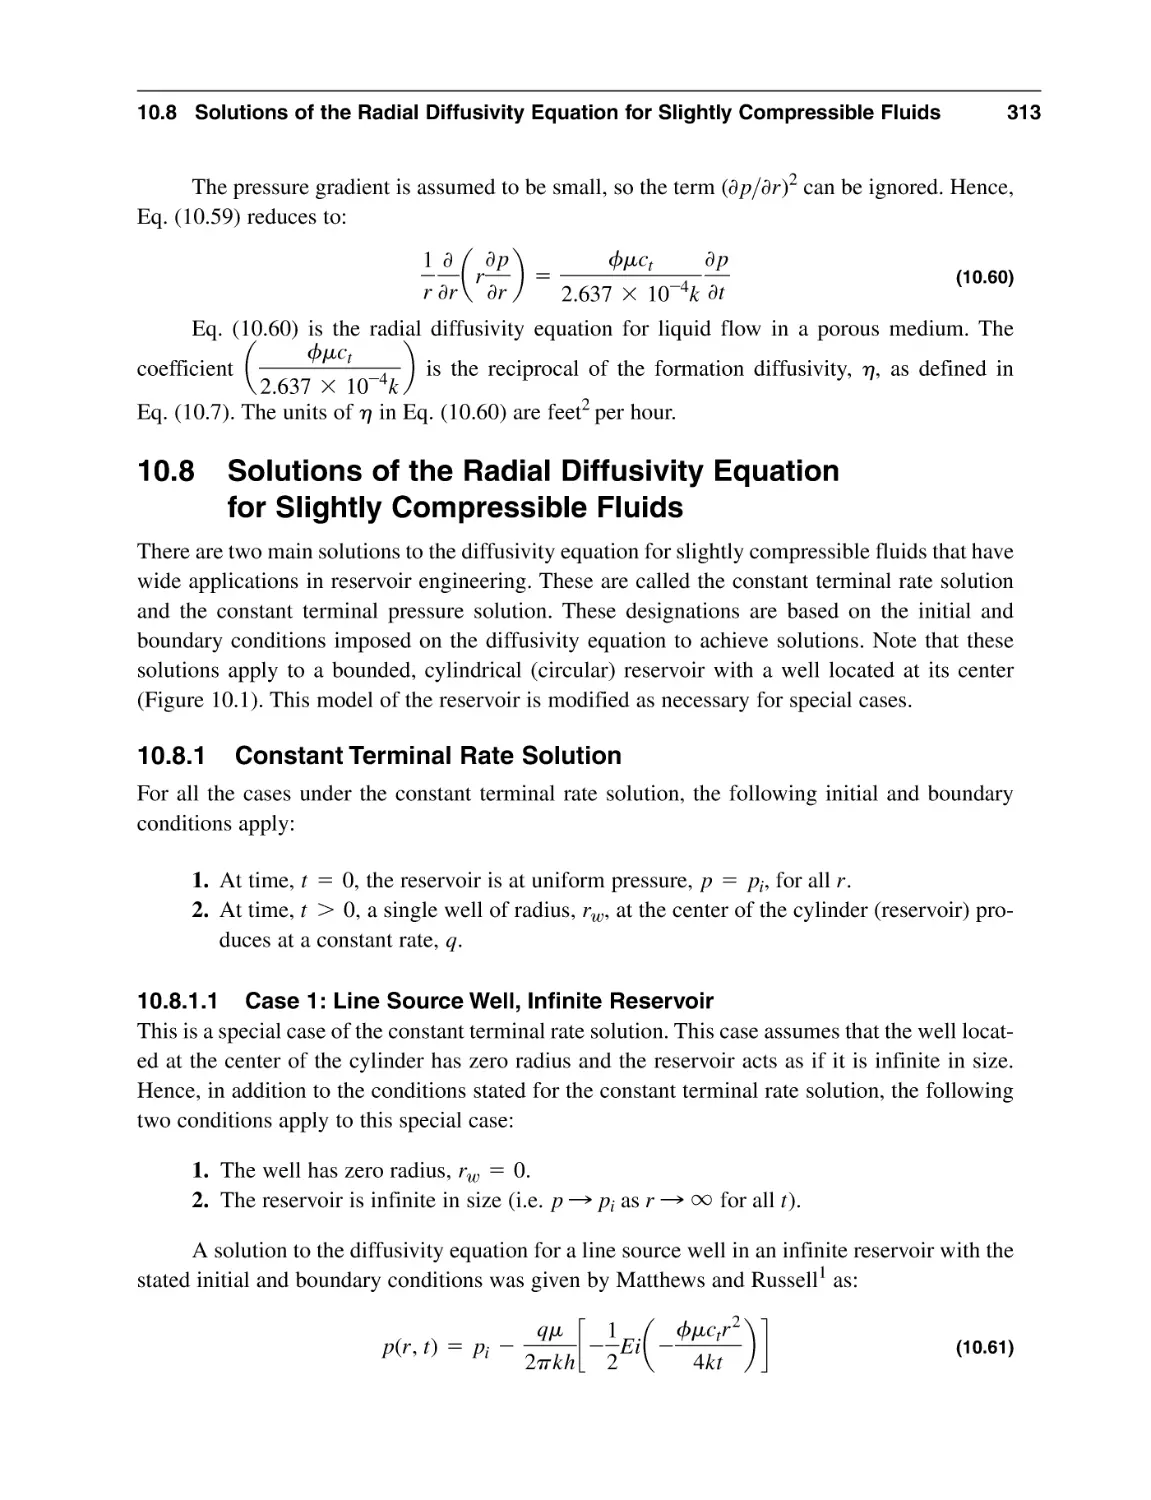 10.8 Solutions of the Radial Diffusivity Equation for Slightly Compressible Fluids
10.8.1 Constant Terminal Rate Solution